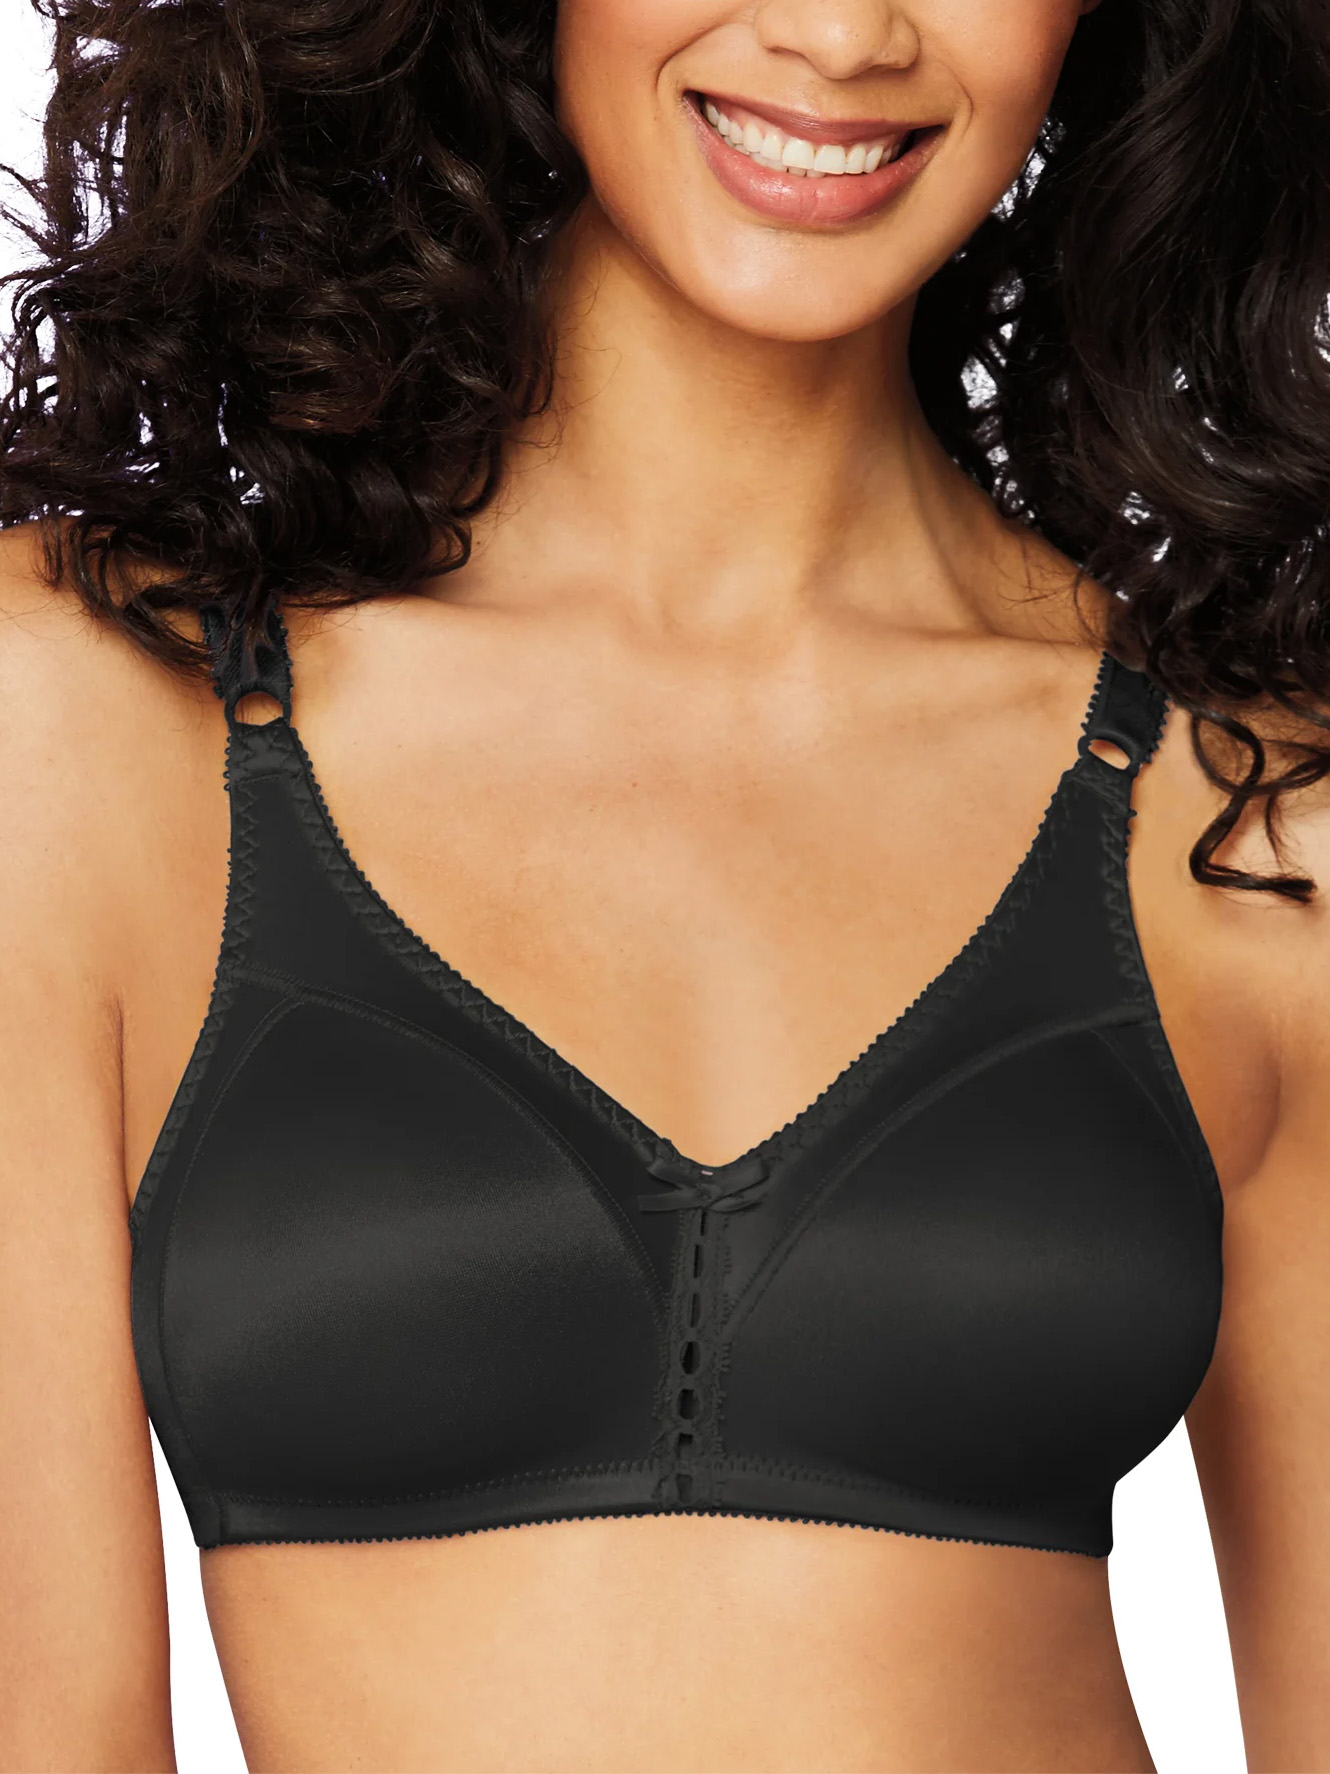 Bali 3820 Double Support Wirefree Bra Size 38b Black for sale online